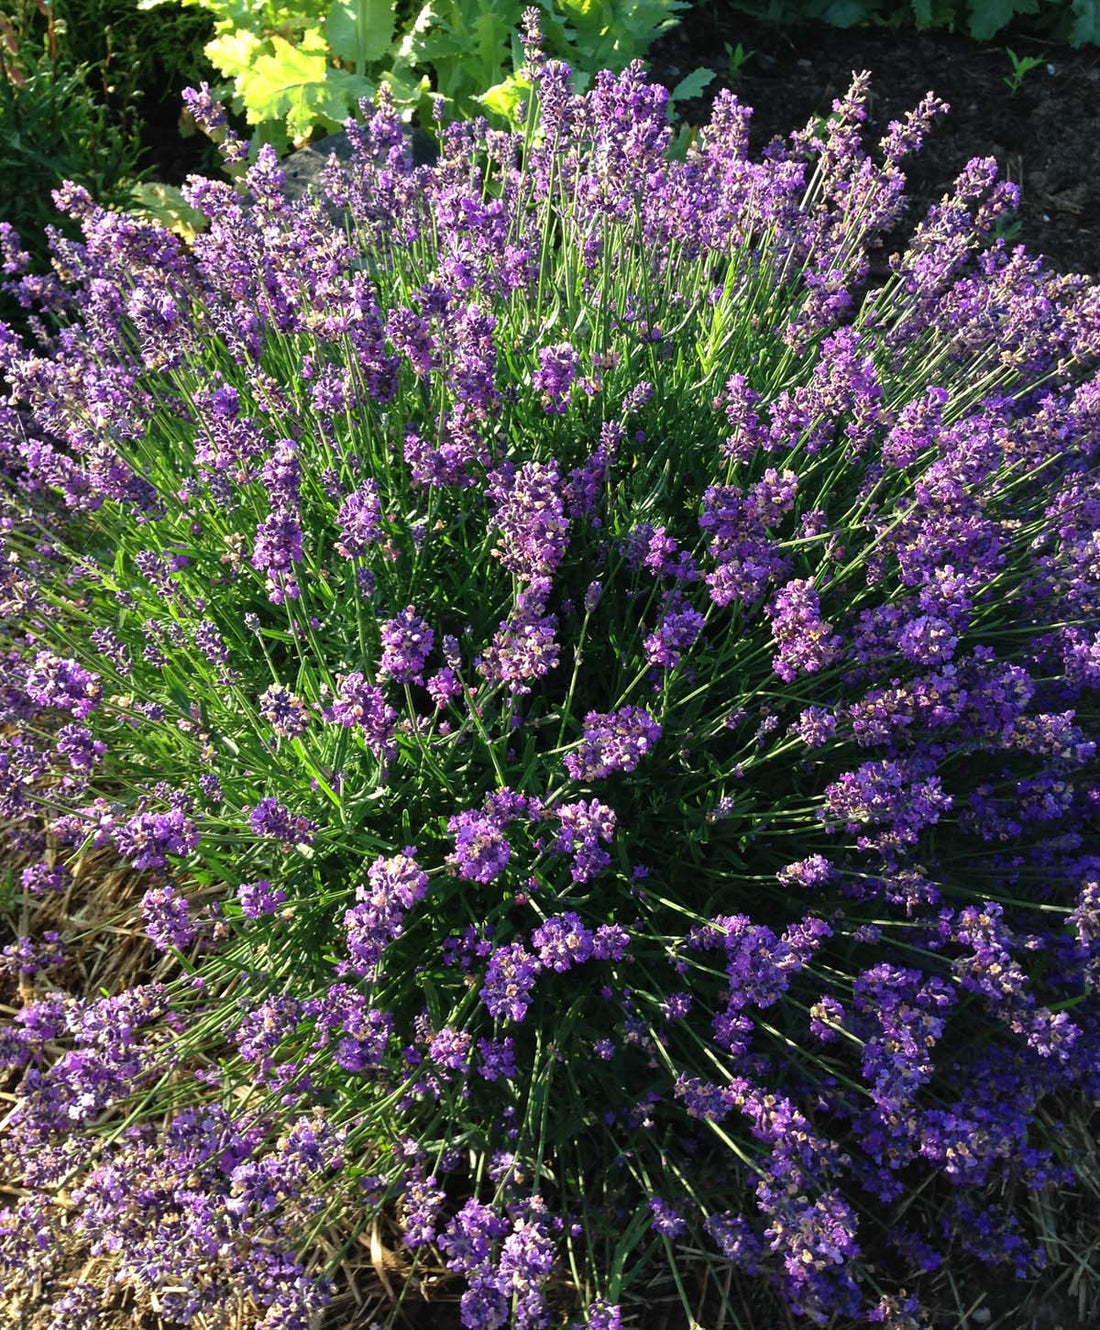 The Herb Garden: Growing Great Lavender